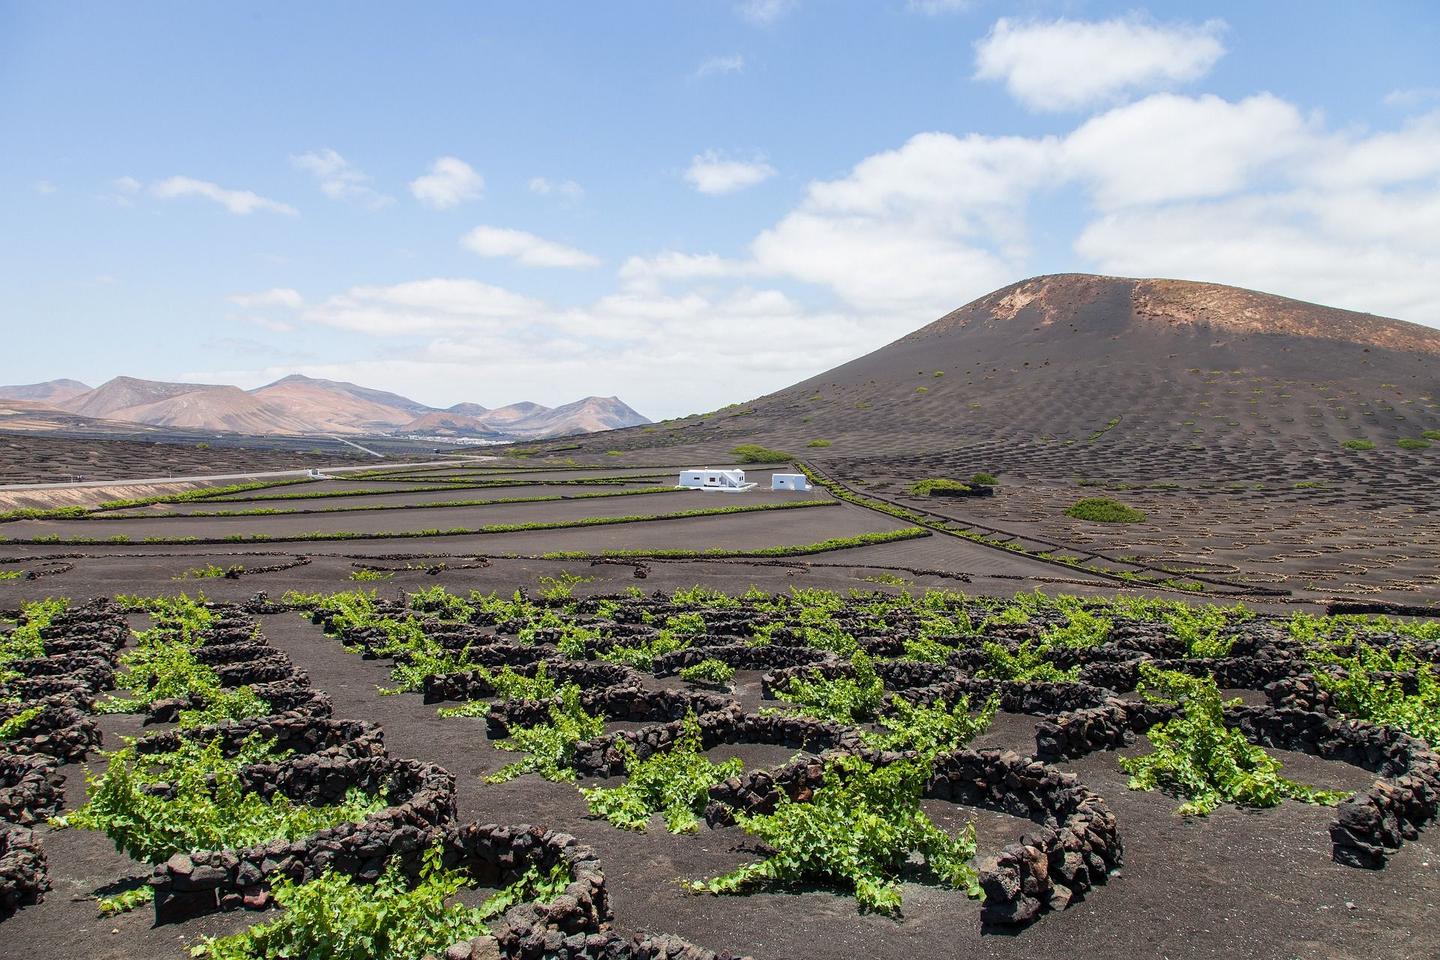 A scenic view of vineyards in Lanzarote with green vines planted in black volcanic soil, surrounded by circular stone walls, and a backdrop of mountains under a blue sky.